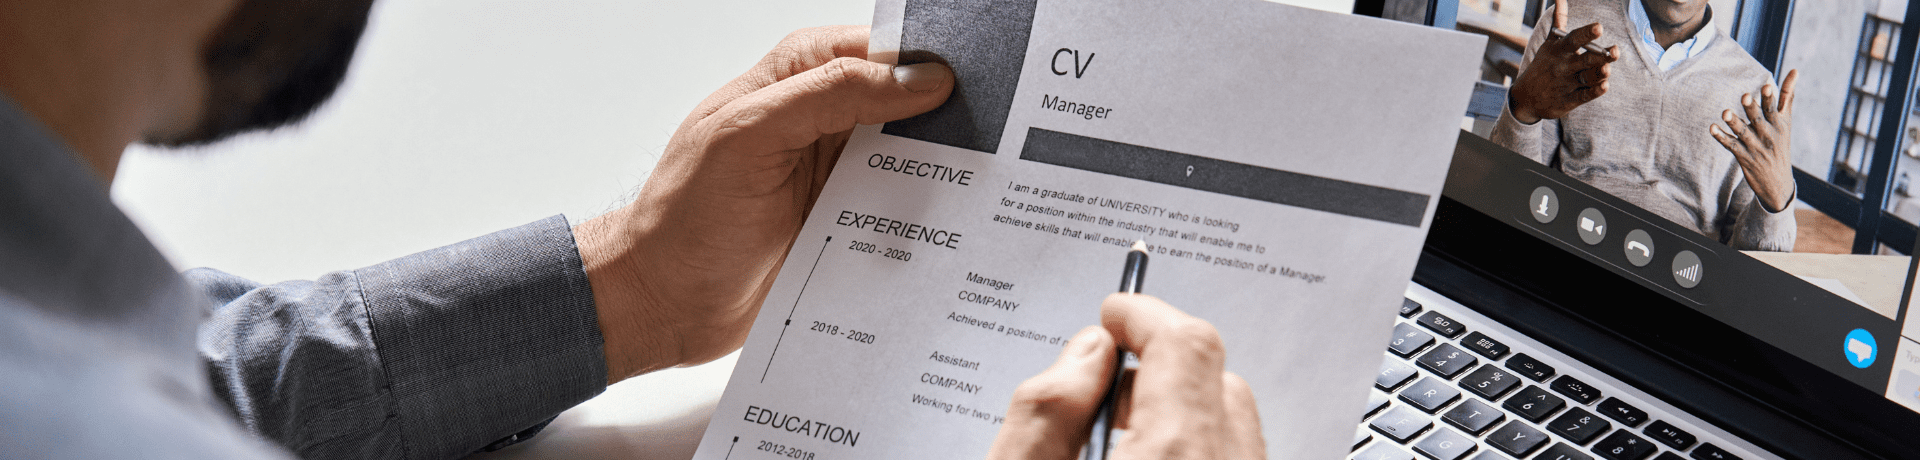 10 Tips for writing a Project Manager CV